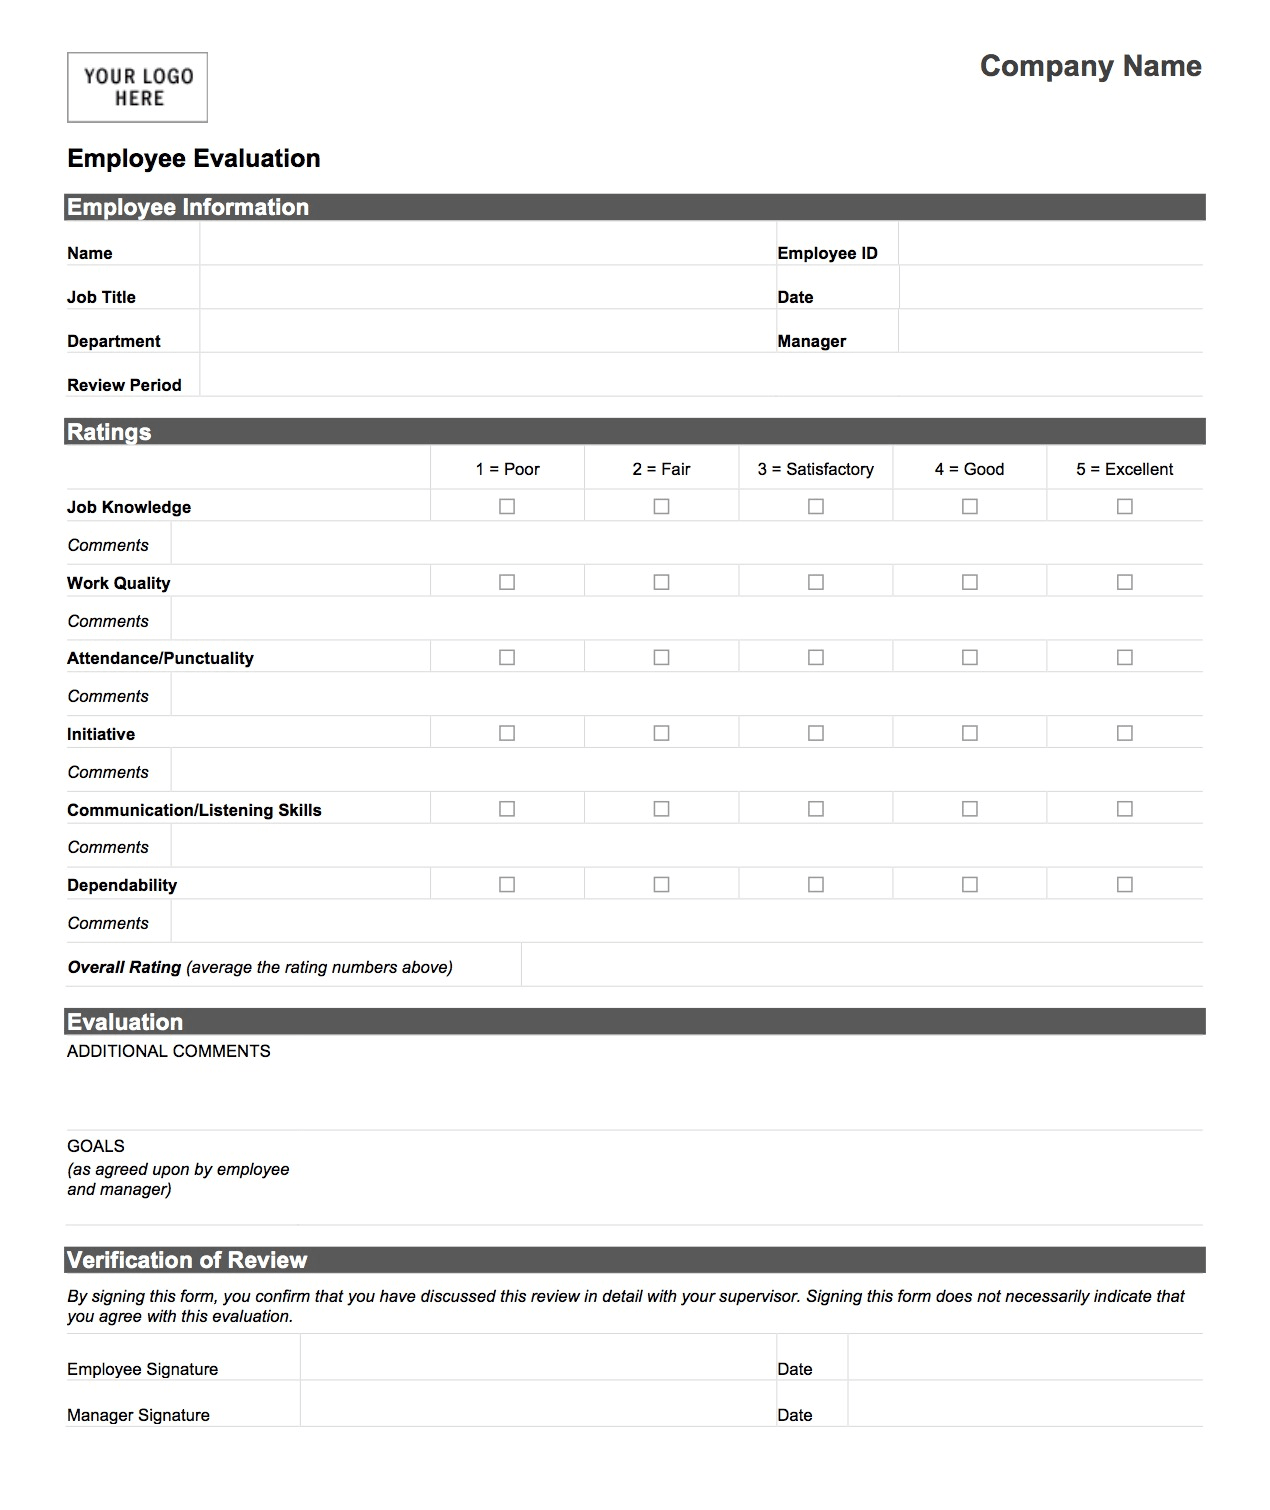 Employee Evaluation Form Employee Performance Review 